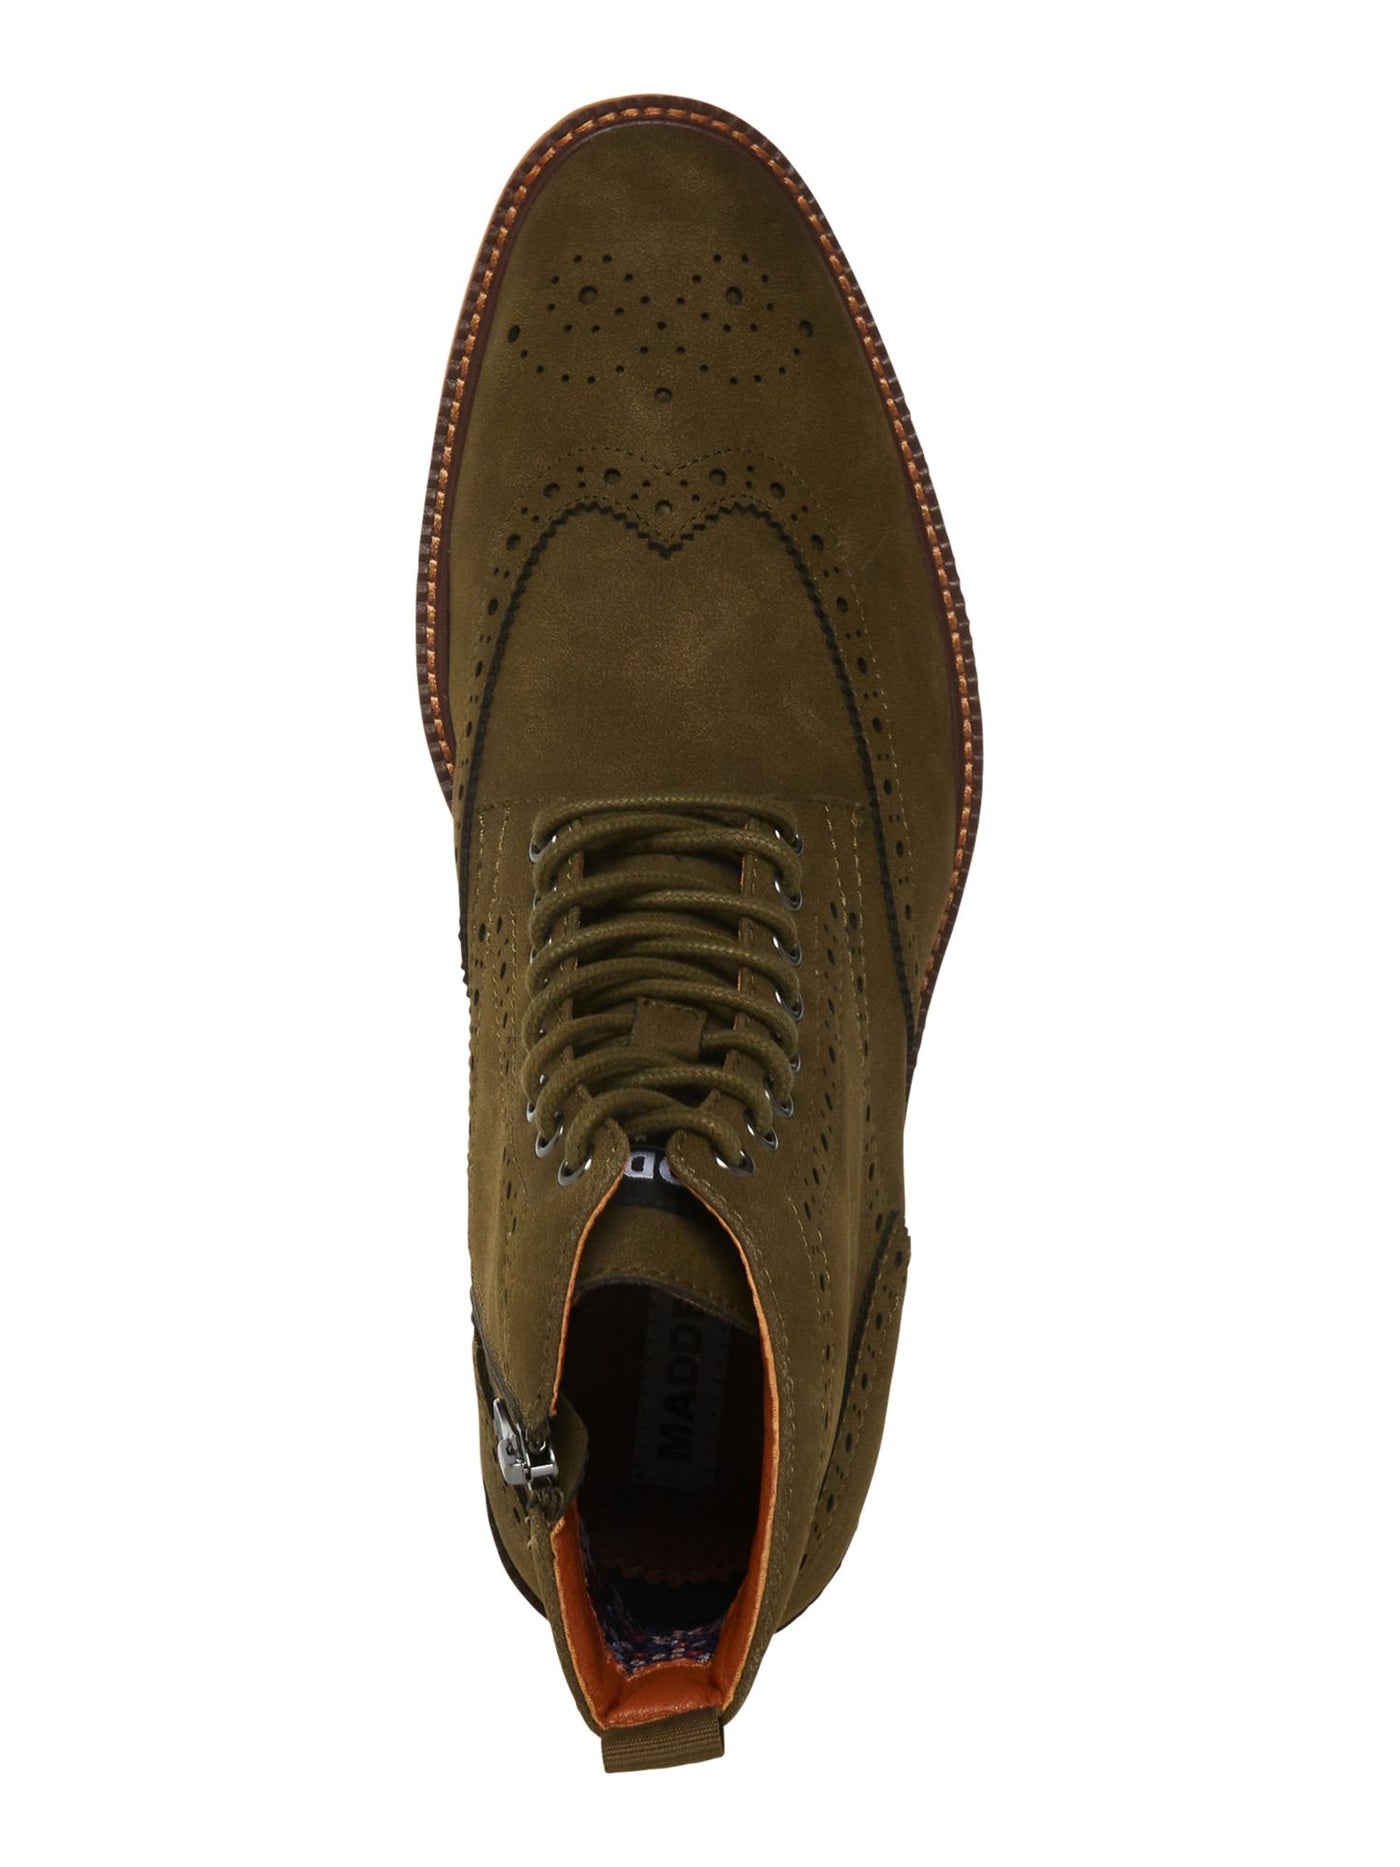 MADDEN Mens Olive Green Brogue Detailing Lace-Up Front Heel Pull-Tab Padded Remppr Wingtip Toe Block Heel Zip-Up Boots Shoes 7.5